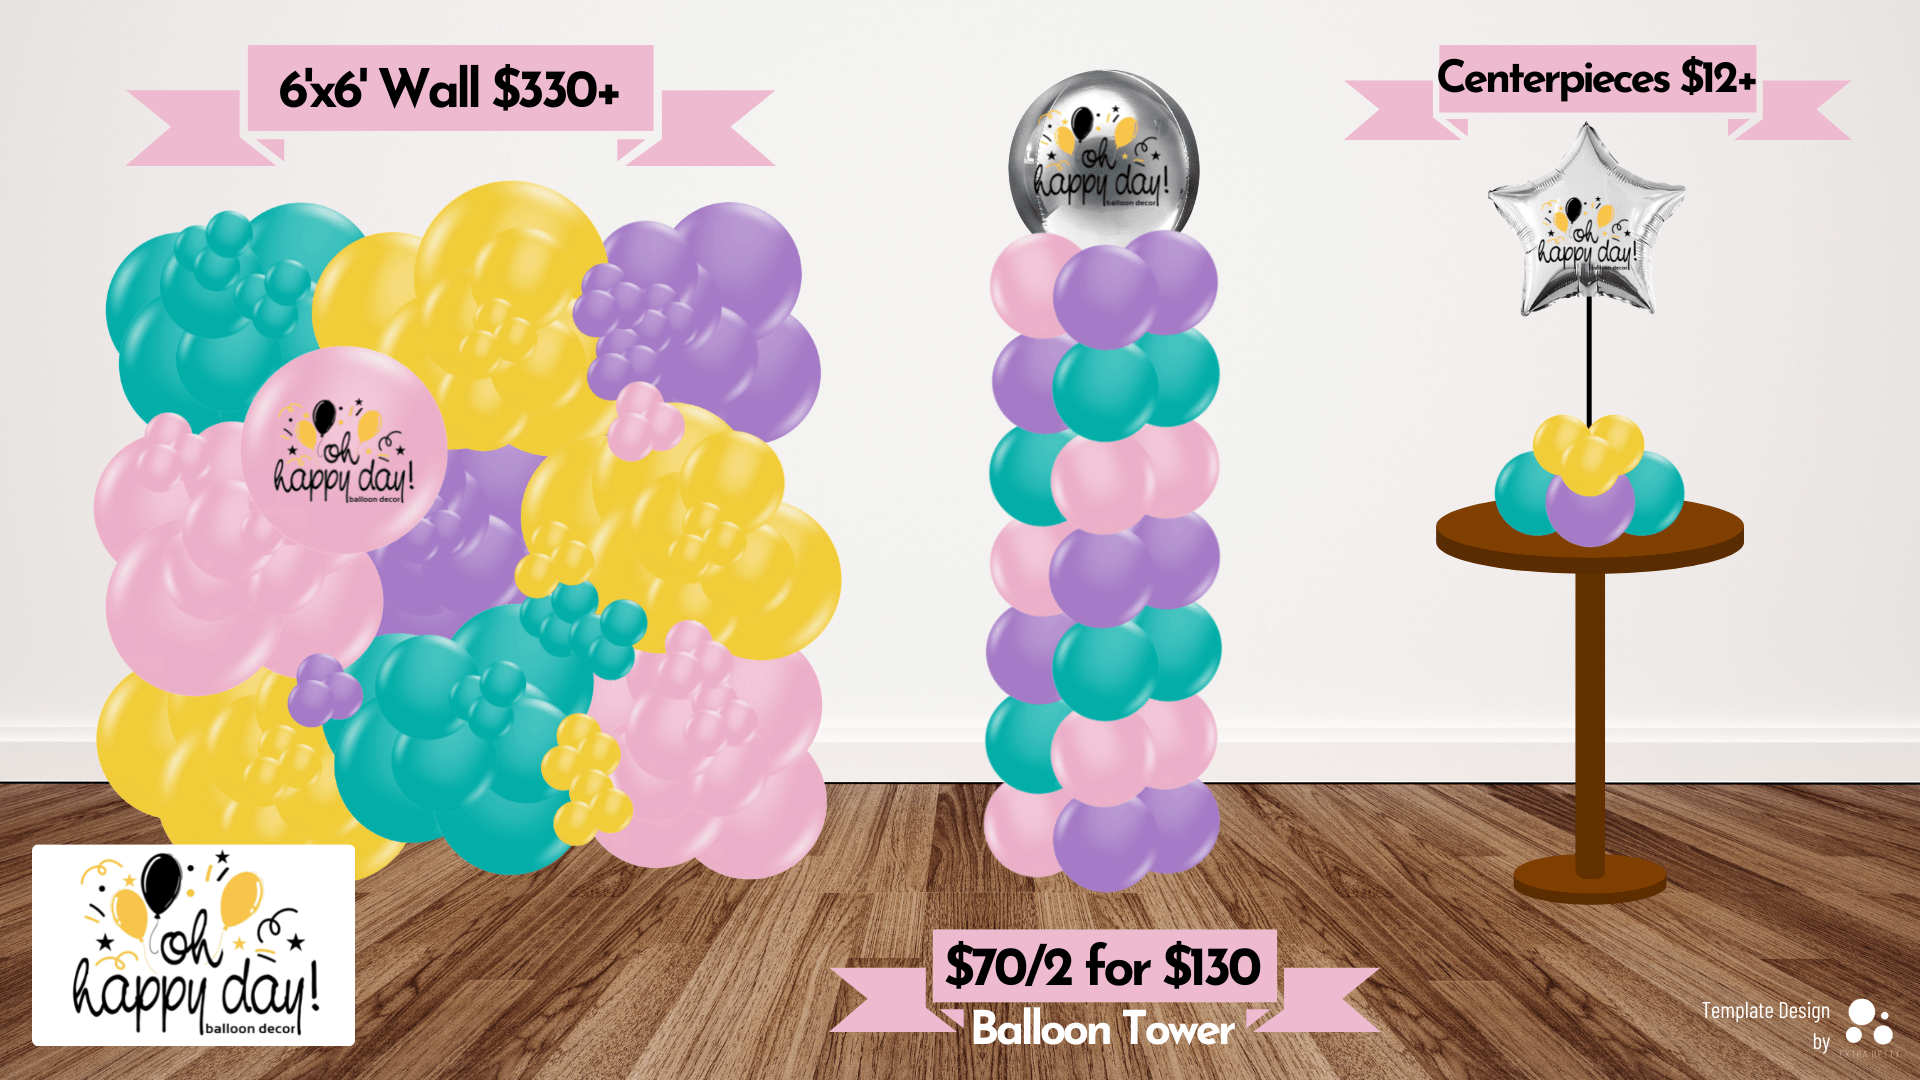 Balloon garland pricing guide 6x6 Wall: $330+ | Balloon Tower: $70/2 for $130 | Centerpieces $12+